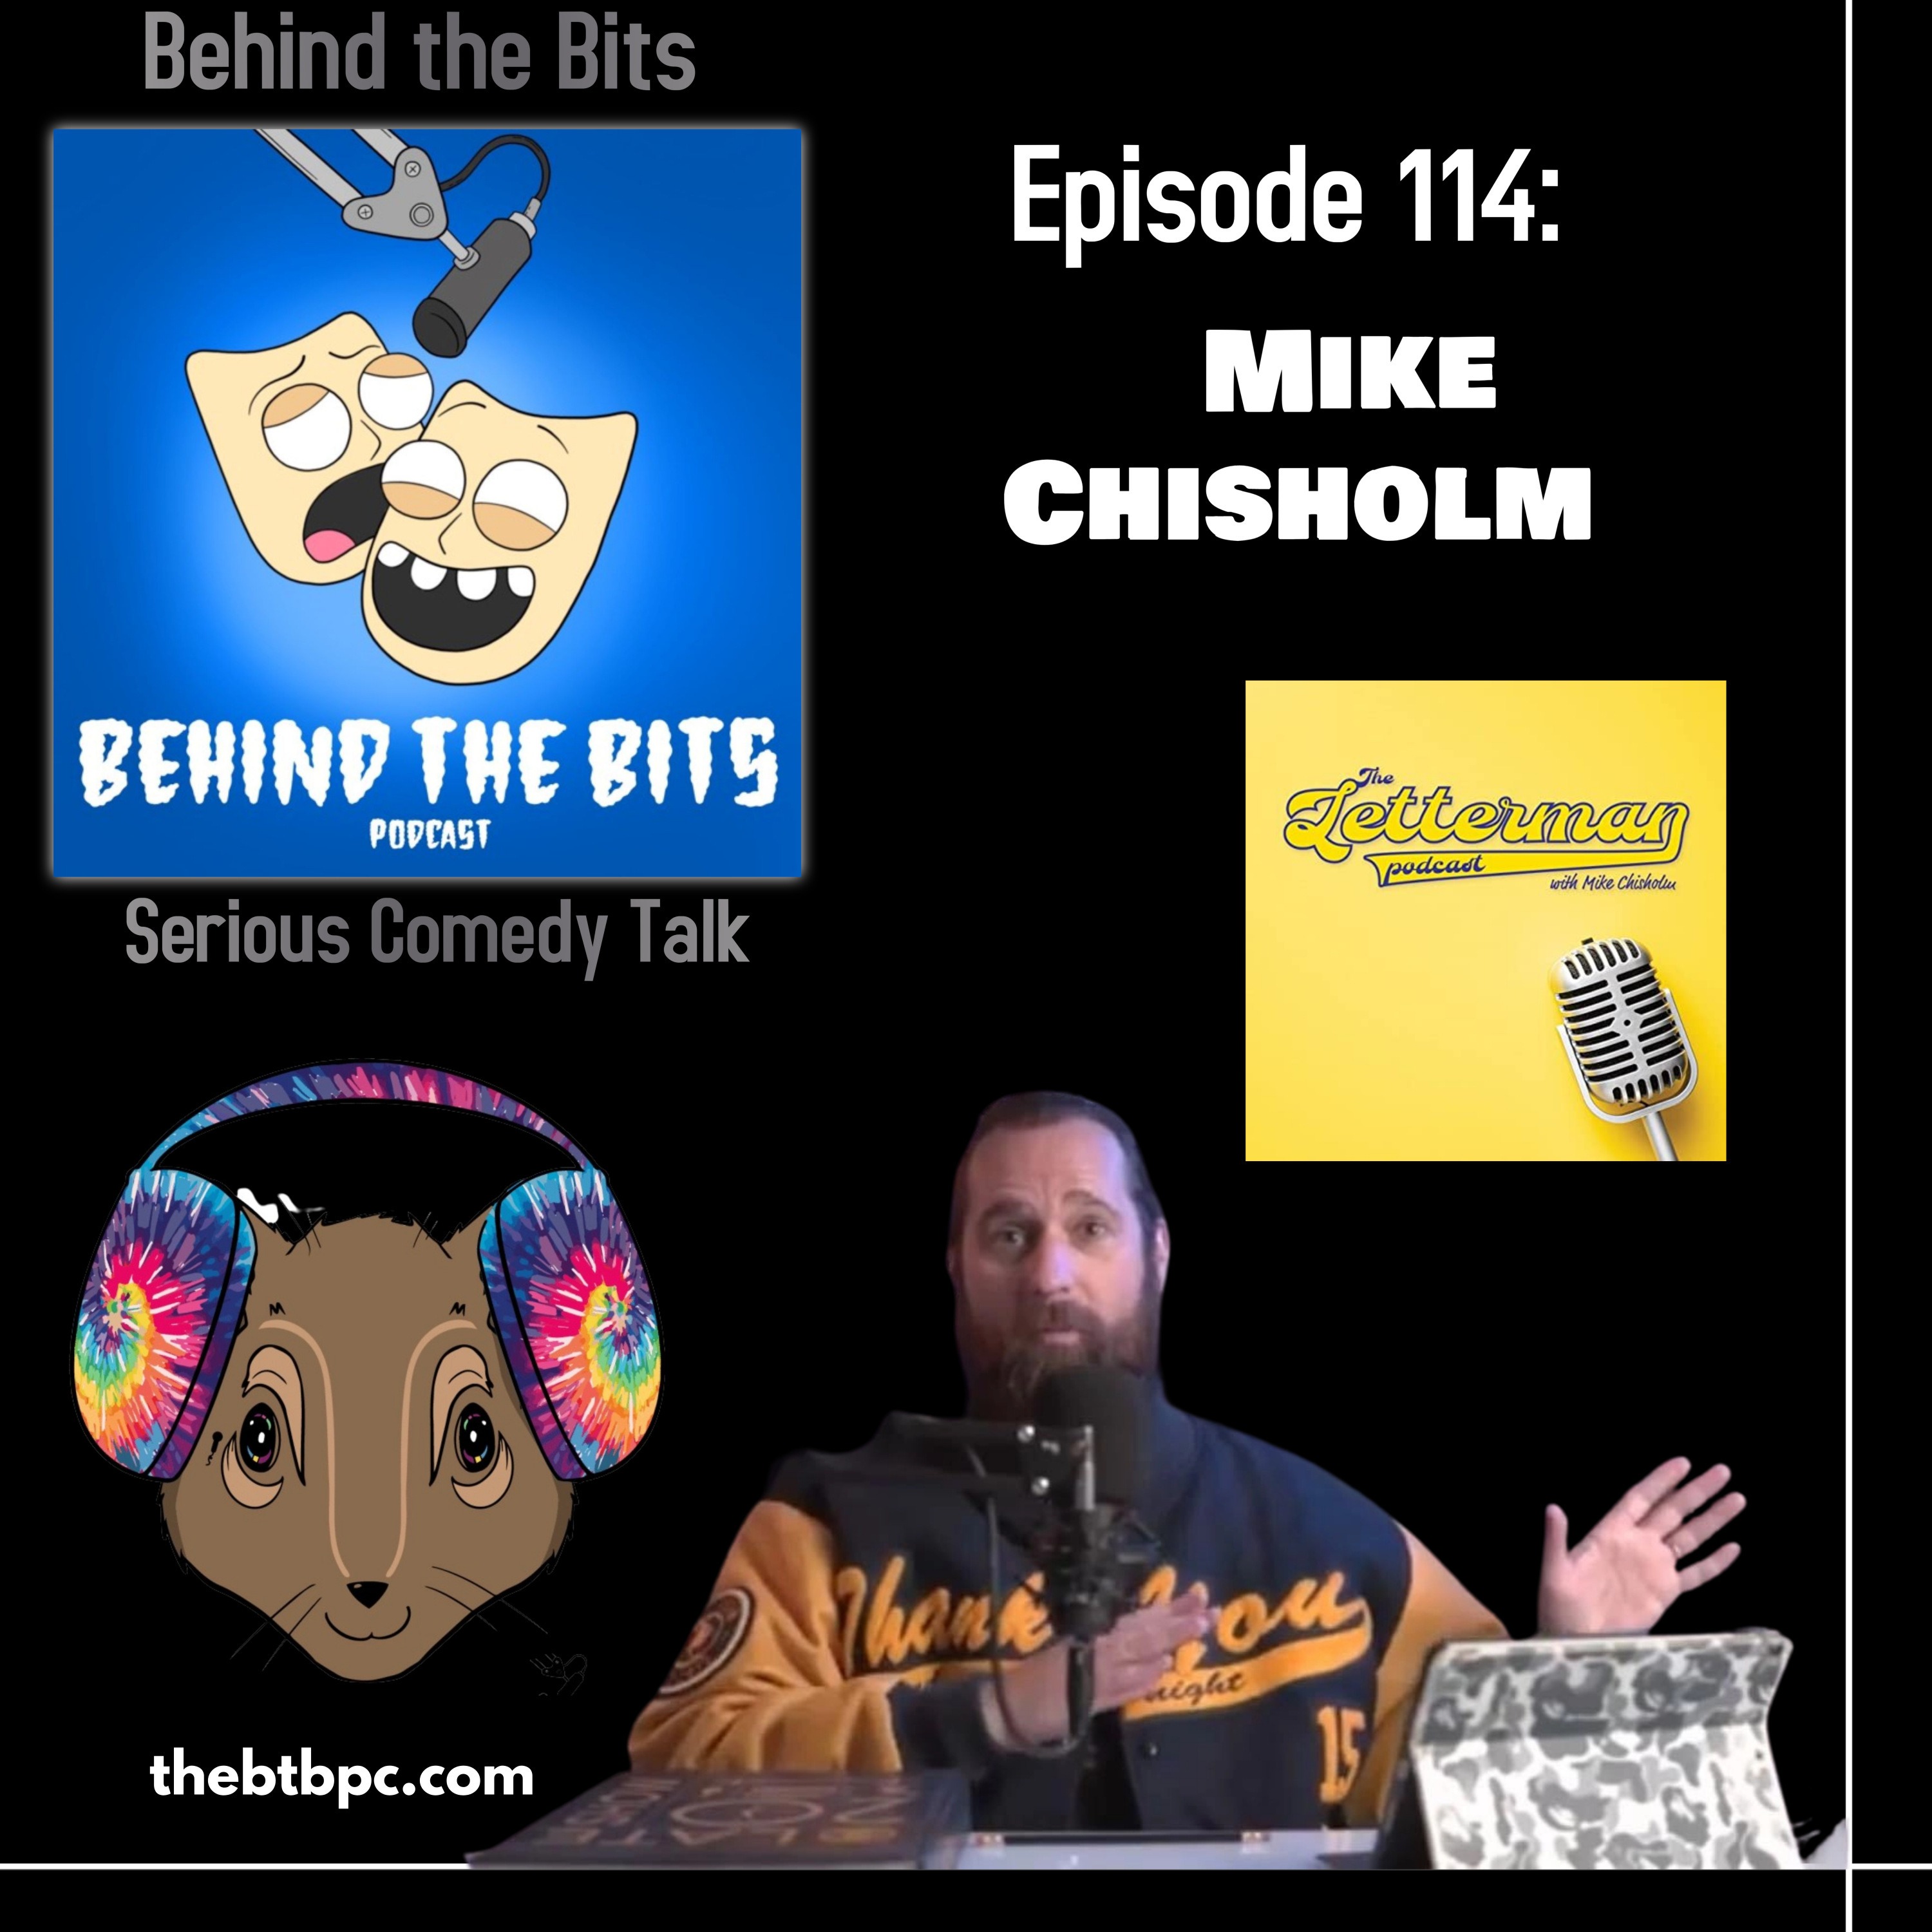 Episode 114: Mike Chisholm - The Letterman Podcast Image